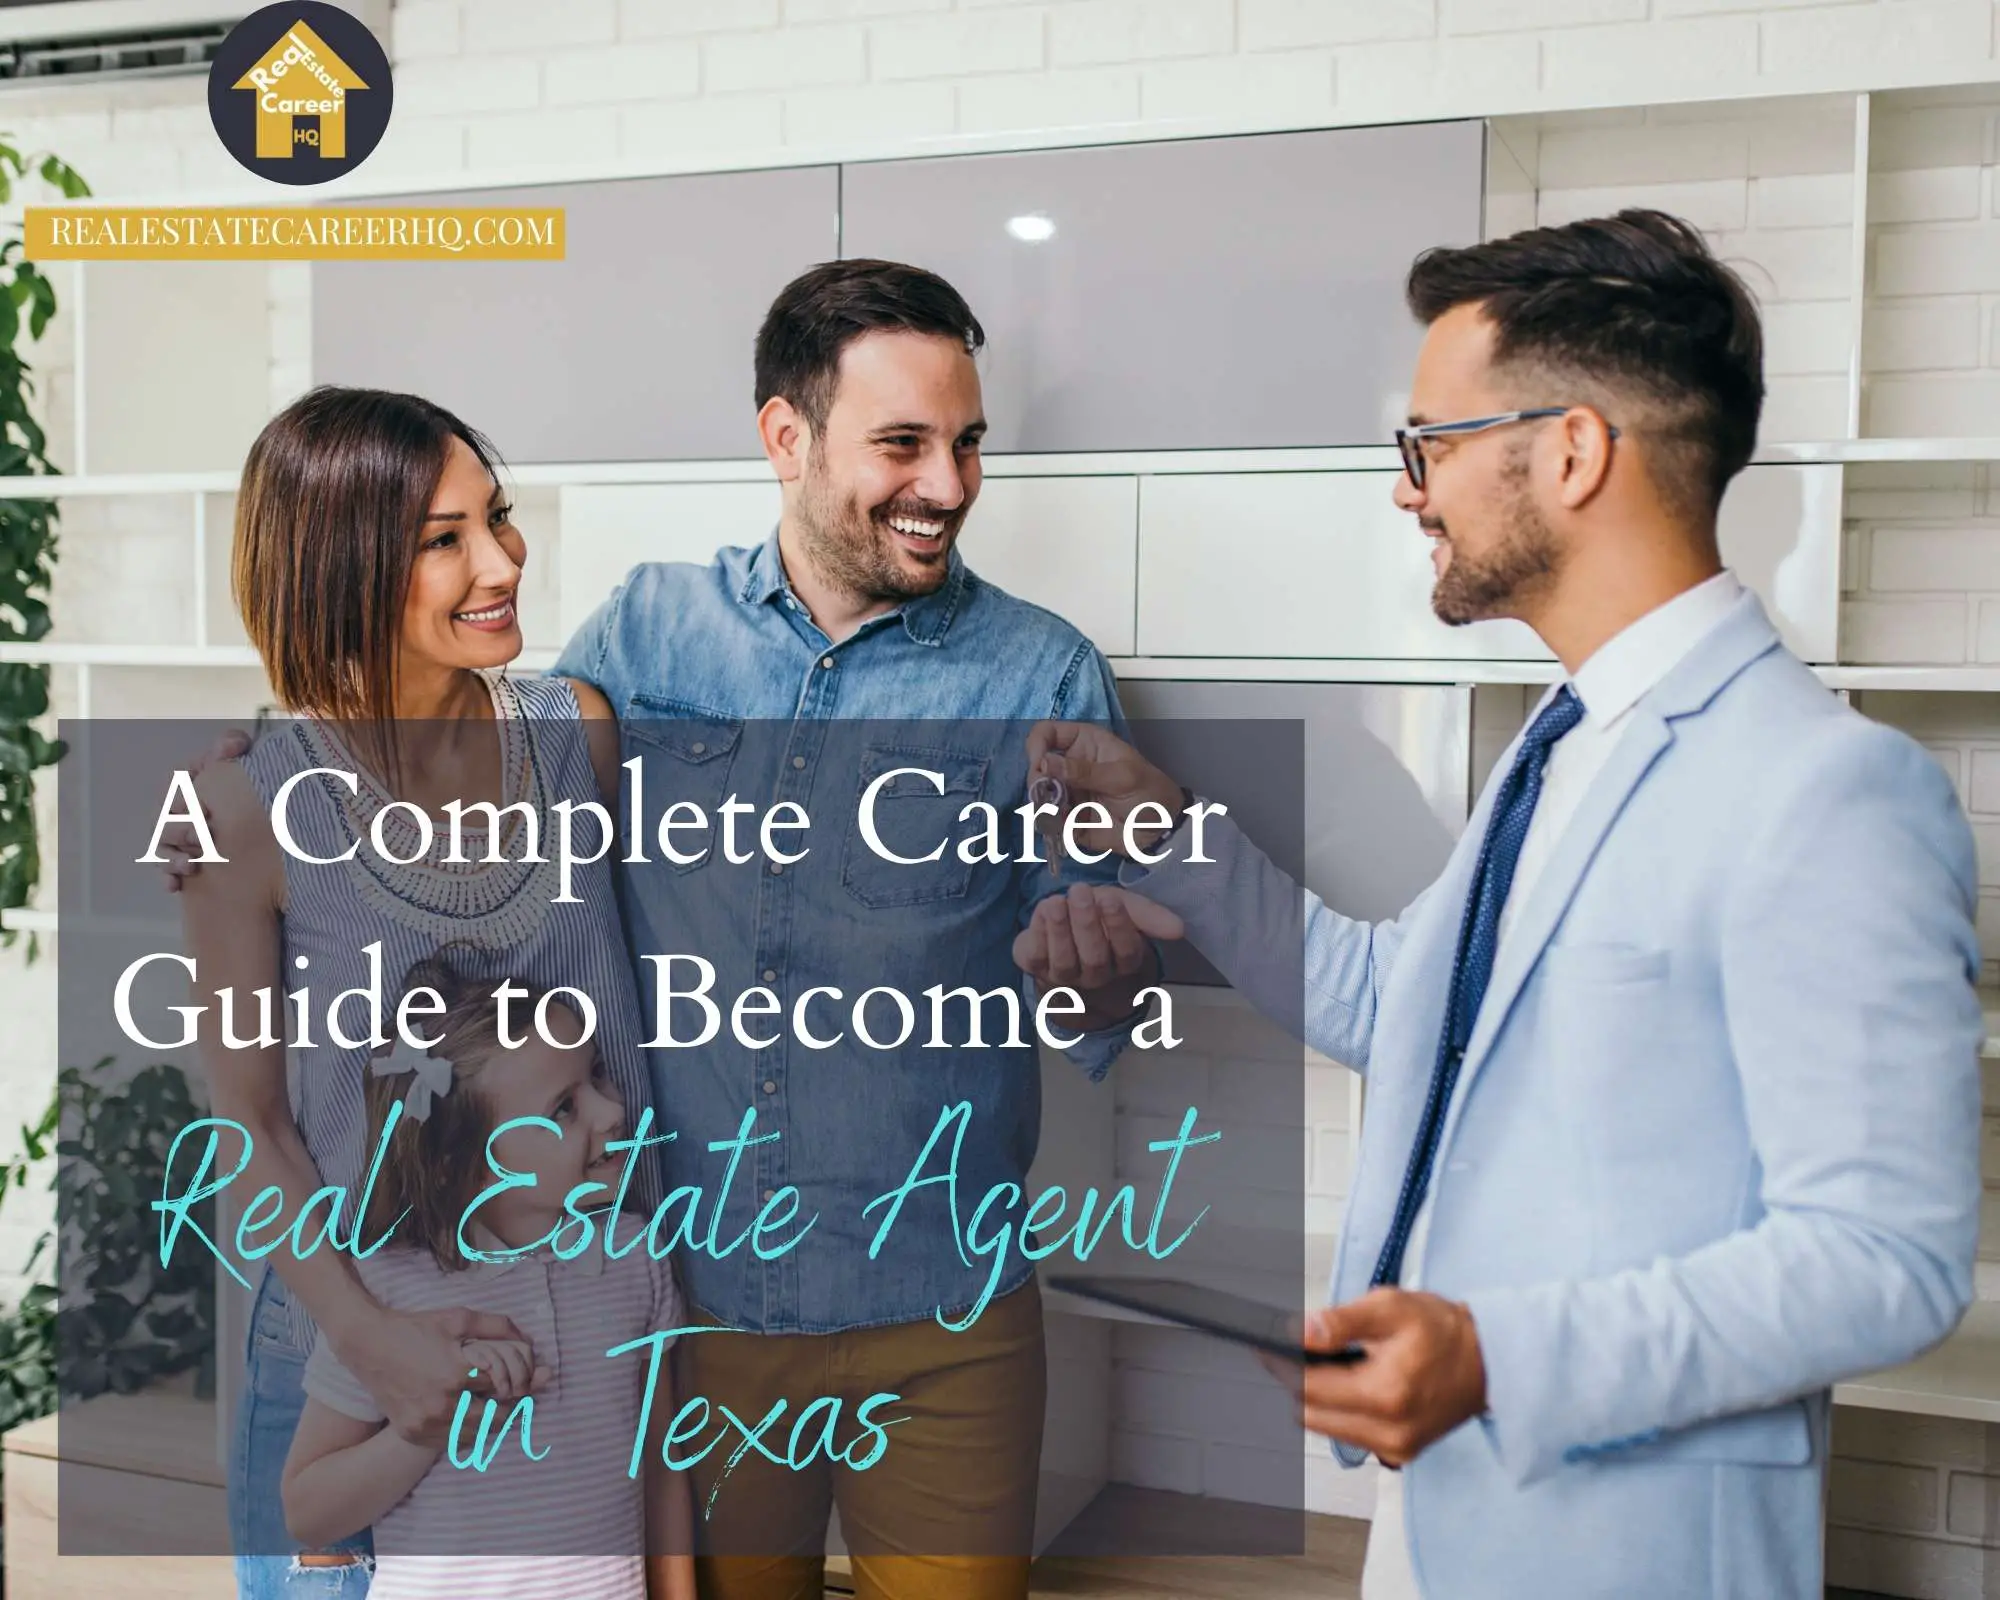 How to become a real estate agent texas